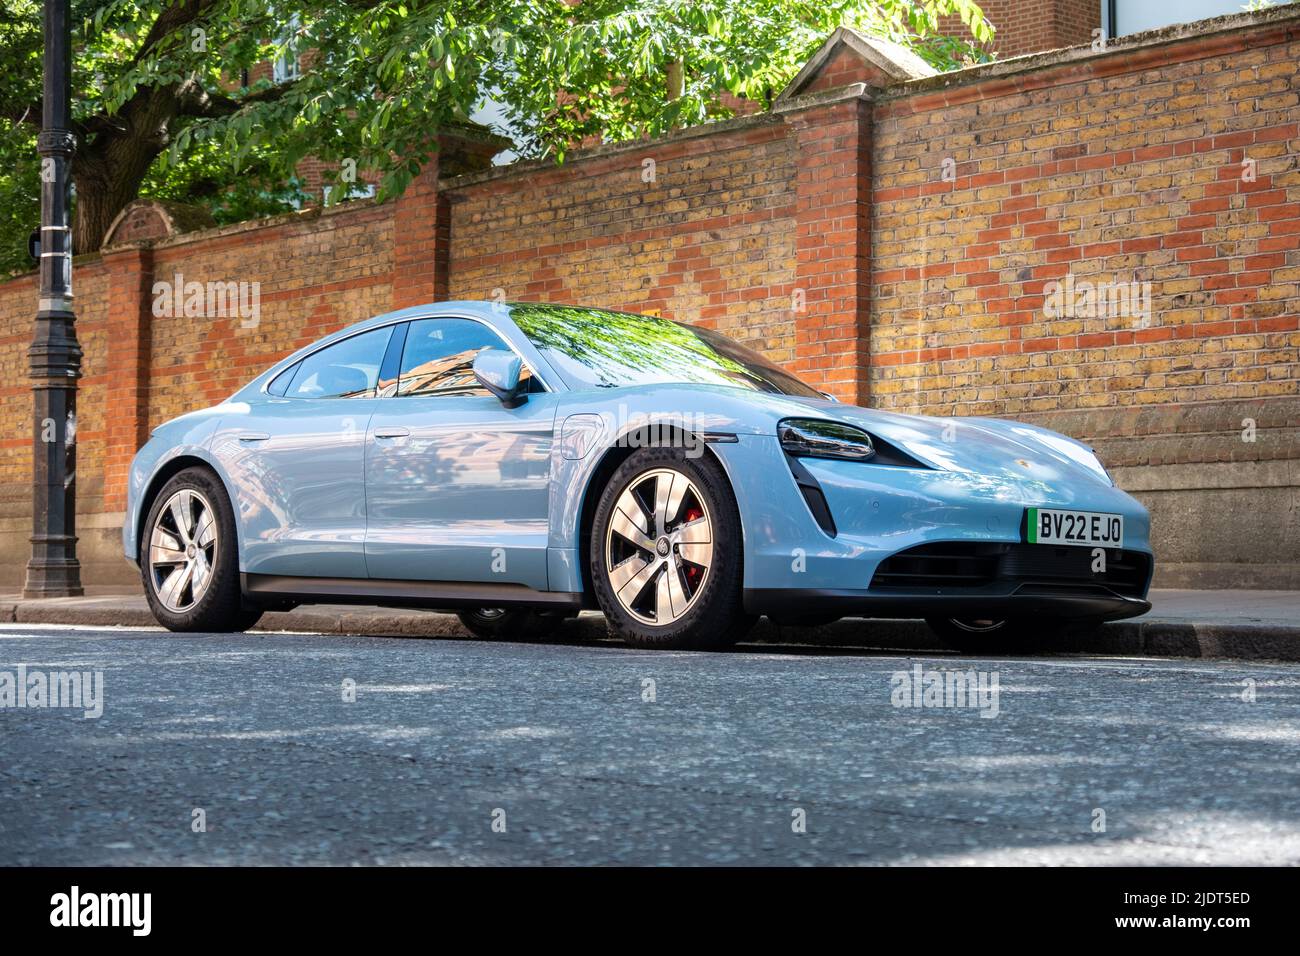 London- May 2022: Porsche Taycan 4S electric car parked on bright London street Stock Photo